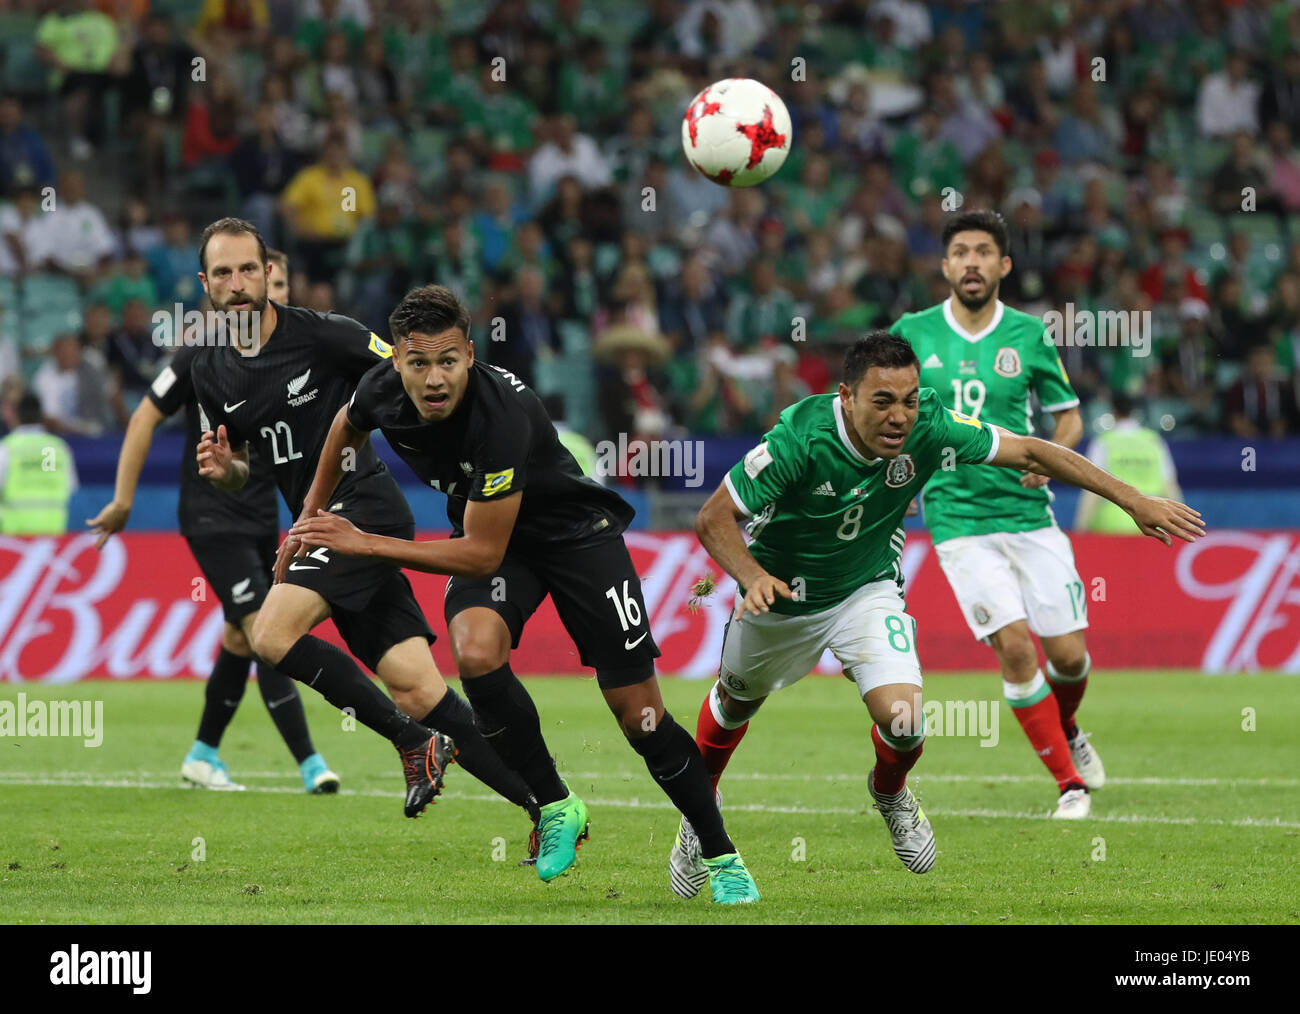 Sochi, Russia. 21st June, 2017. Marco Fabian (2nd R) of Mexico vies with Dane Ingham (2nd L) of New Zealand during the group A match between Mexico and New Zealand of the 2017 FIFA Confederations Cup in Sochi, Russia, on June 21, 2017. Mexico won 2-1. Credit: Xu Zijian/Xinhua/Alamy Live News Stock Photo